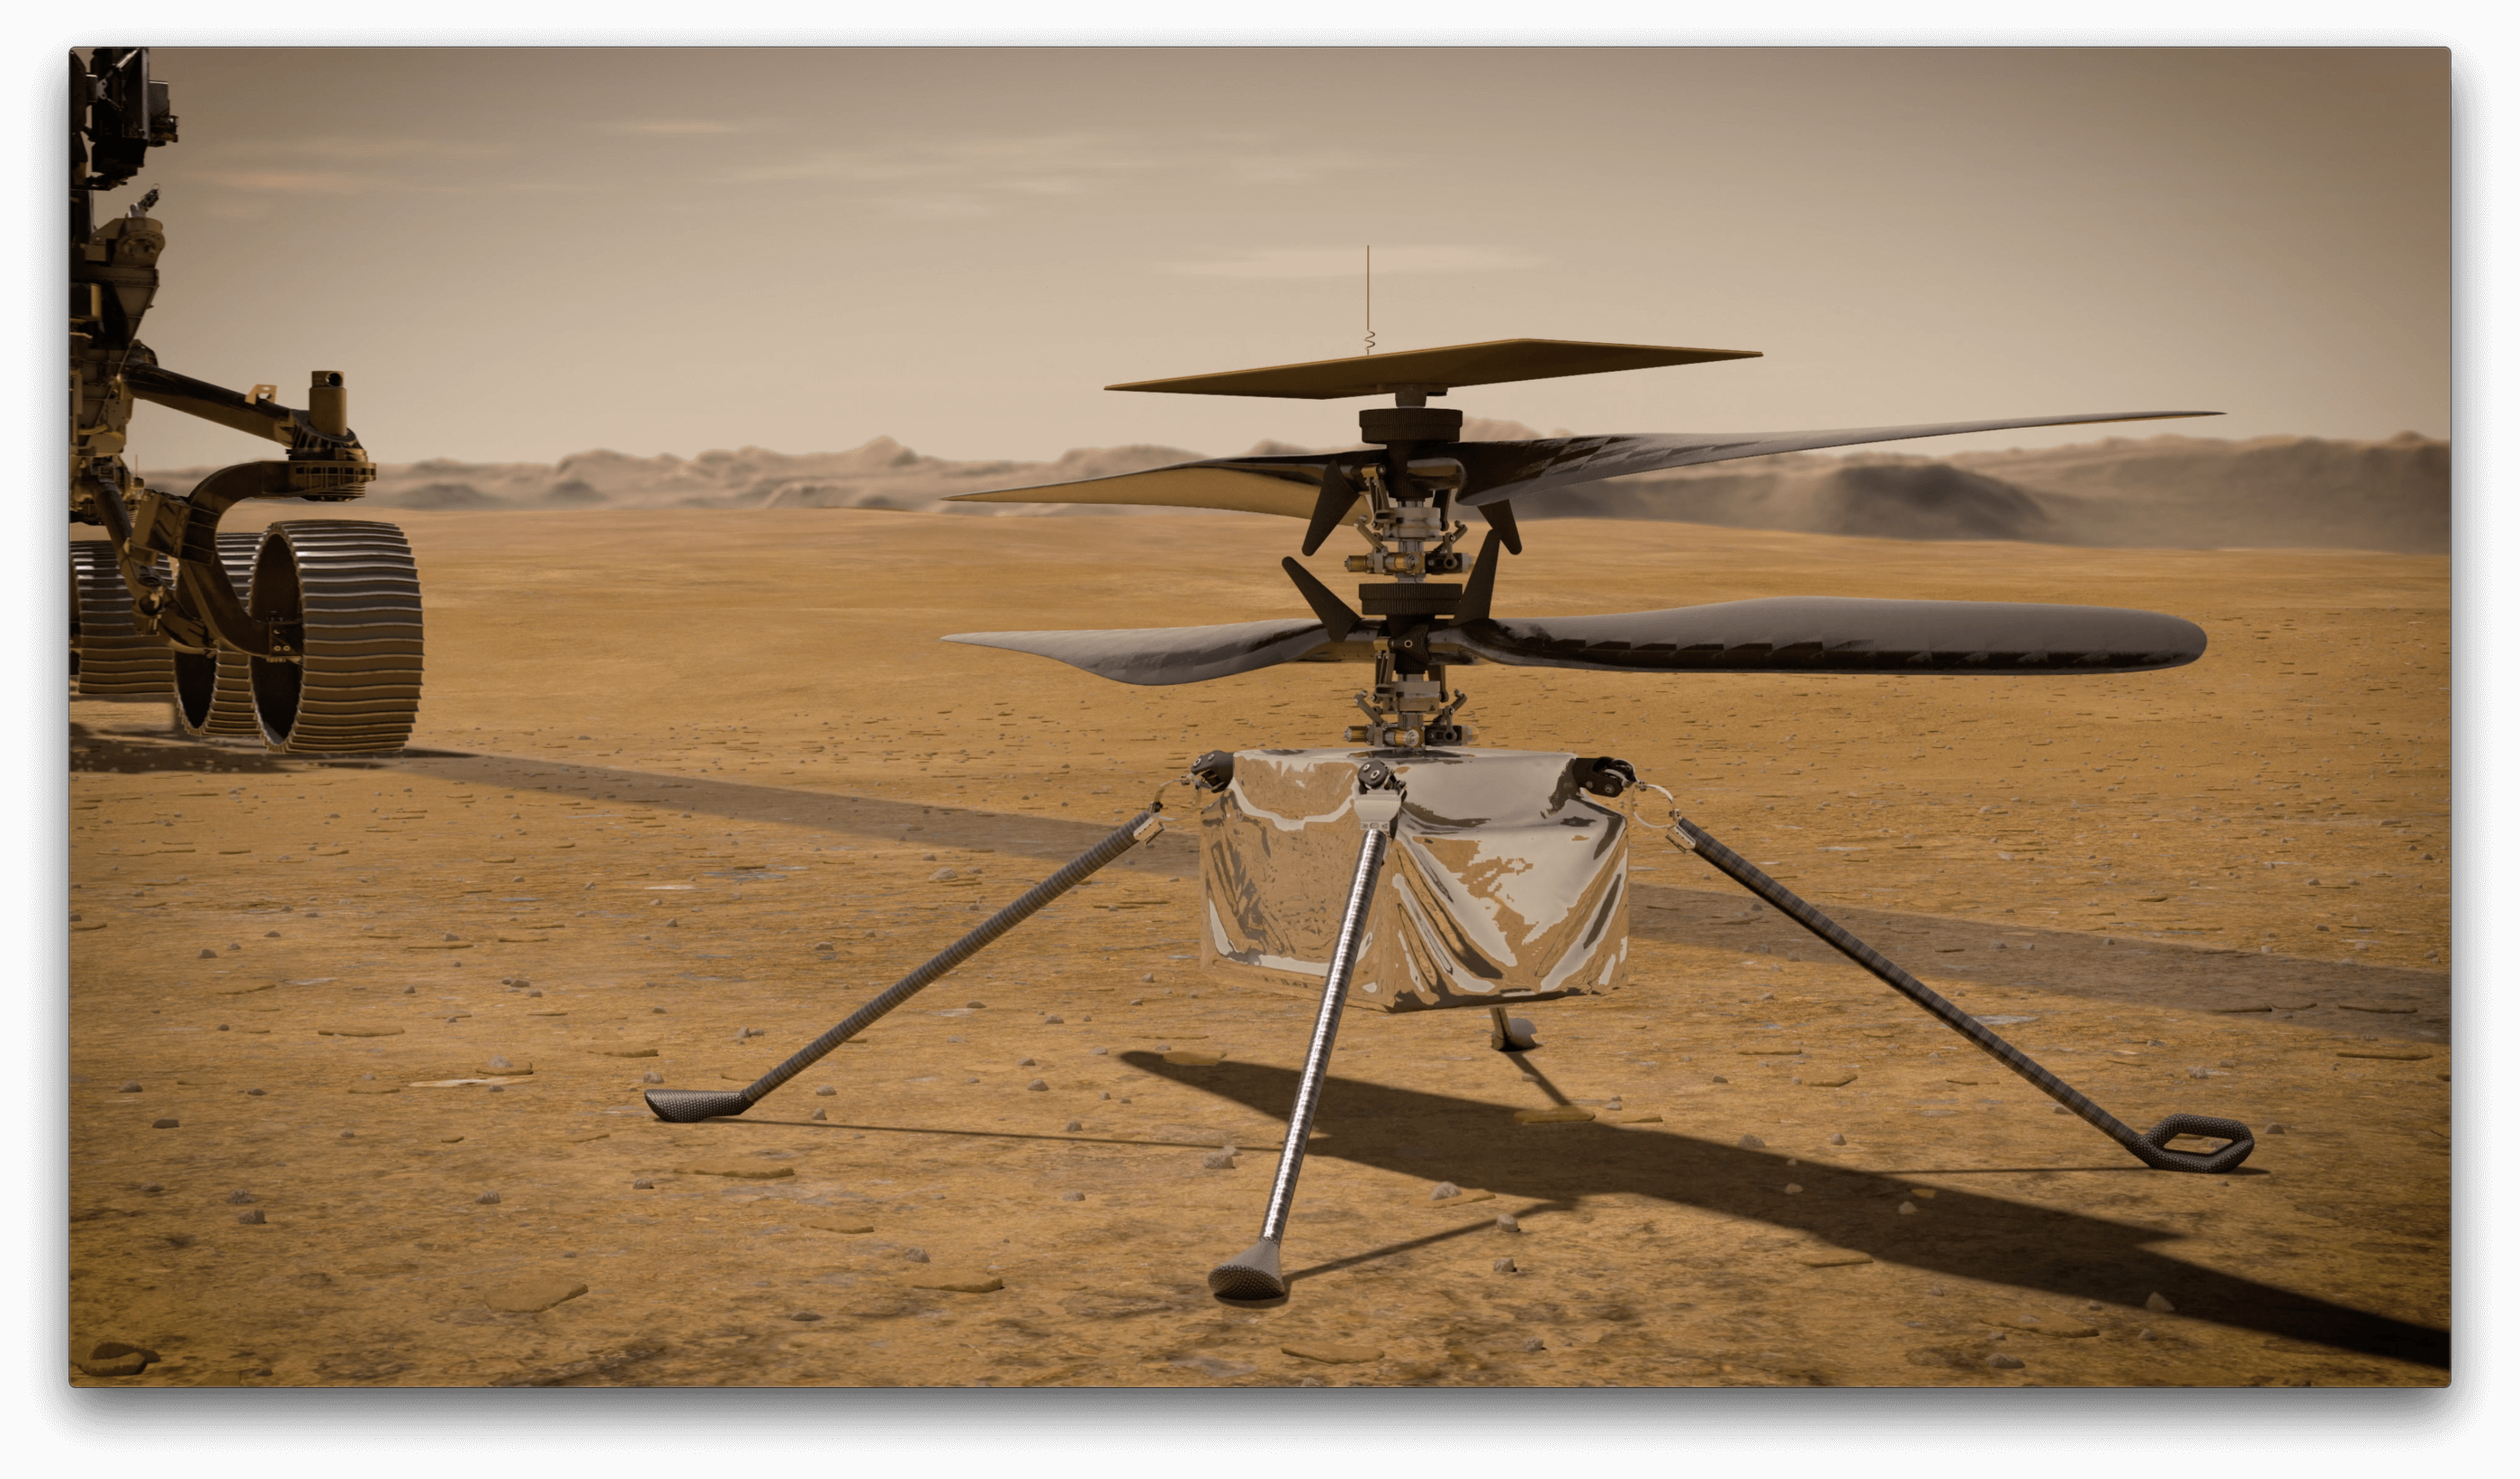 An artist's conceAn artist's concept shows NASA's Ingenuity Mars Helicopter standing on the Red Planet's surface. The aircraft will arrive on Mars on Feb. 18, 2021, and will become the first aircraft to attempt controlled flight on another planet. NASA Imagept shows NASA's Ingenuity Mars Helicopter standing on the Red Planet's surface. The aircraft will arrive on Mars on Feb. 18, 2021, and will become the first aircraft to attempt controlled flight on another planet. NASA Image